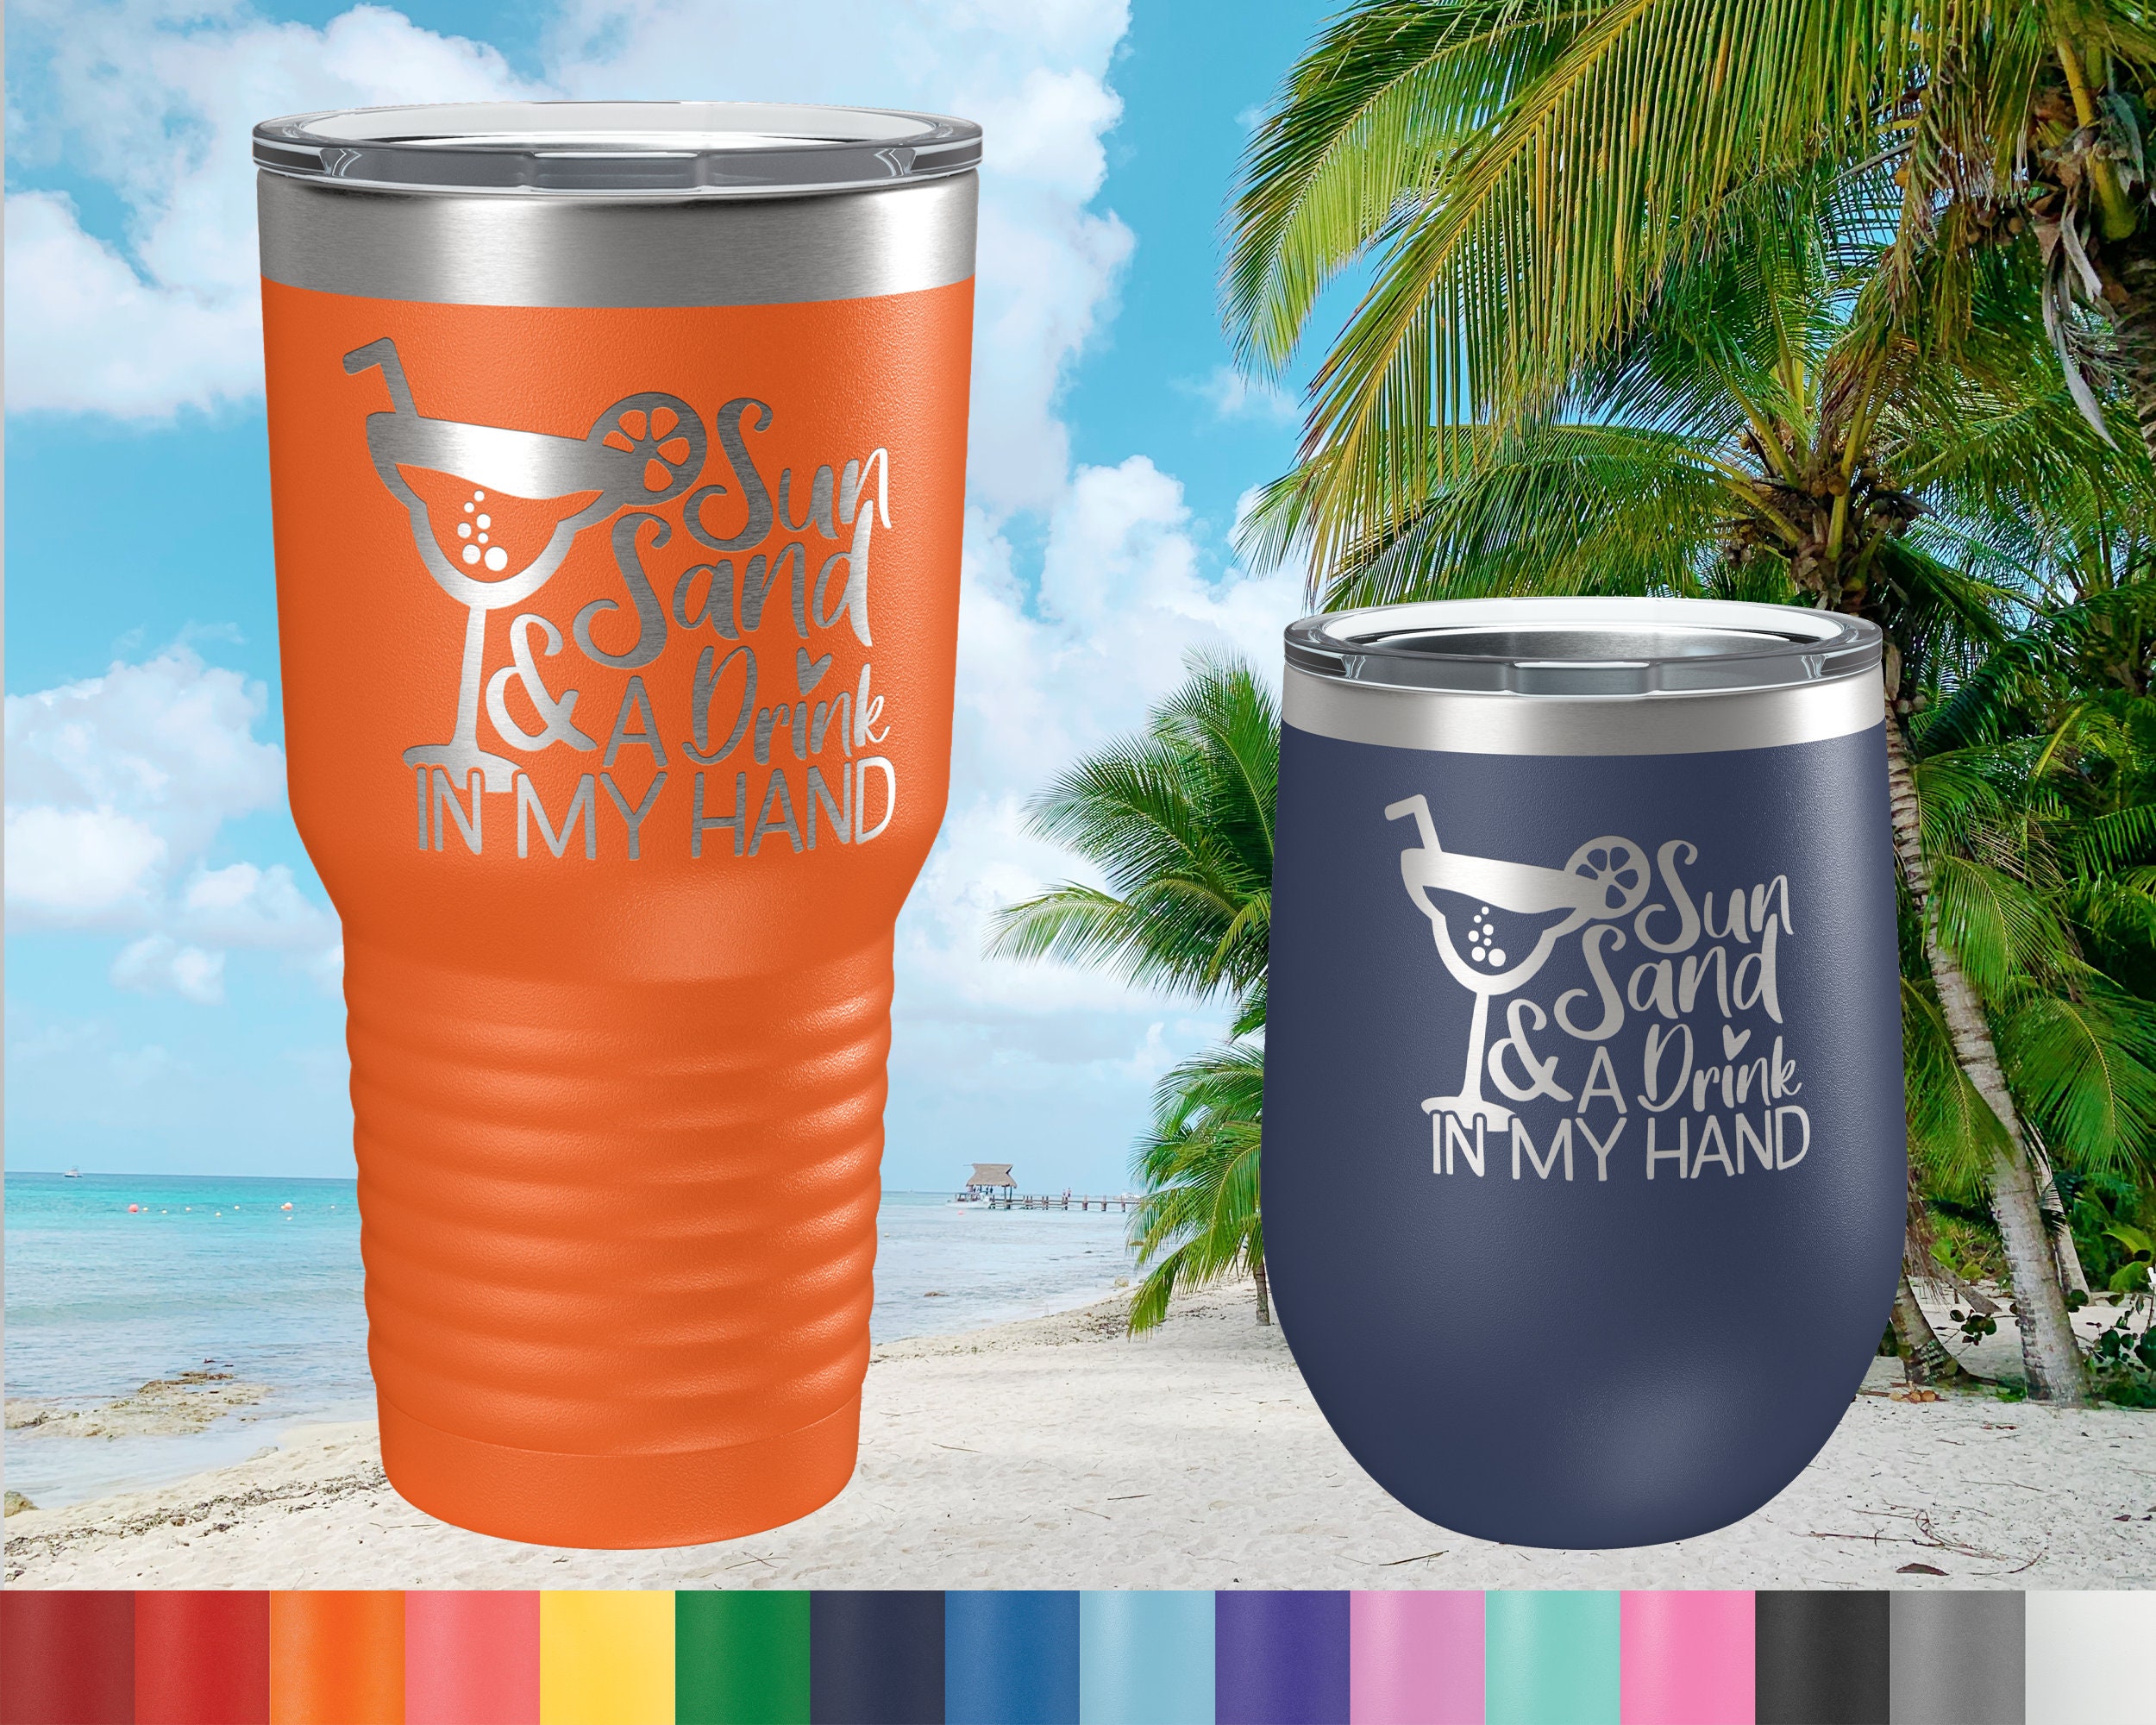 Yeti Laser Engraved Wine Tumbler SUN, SAND, & a DRINK in My Hand